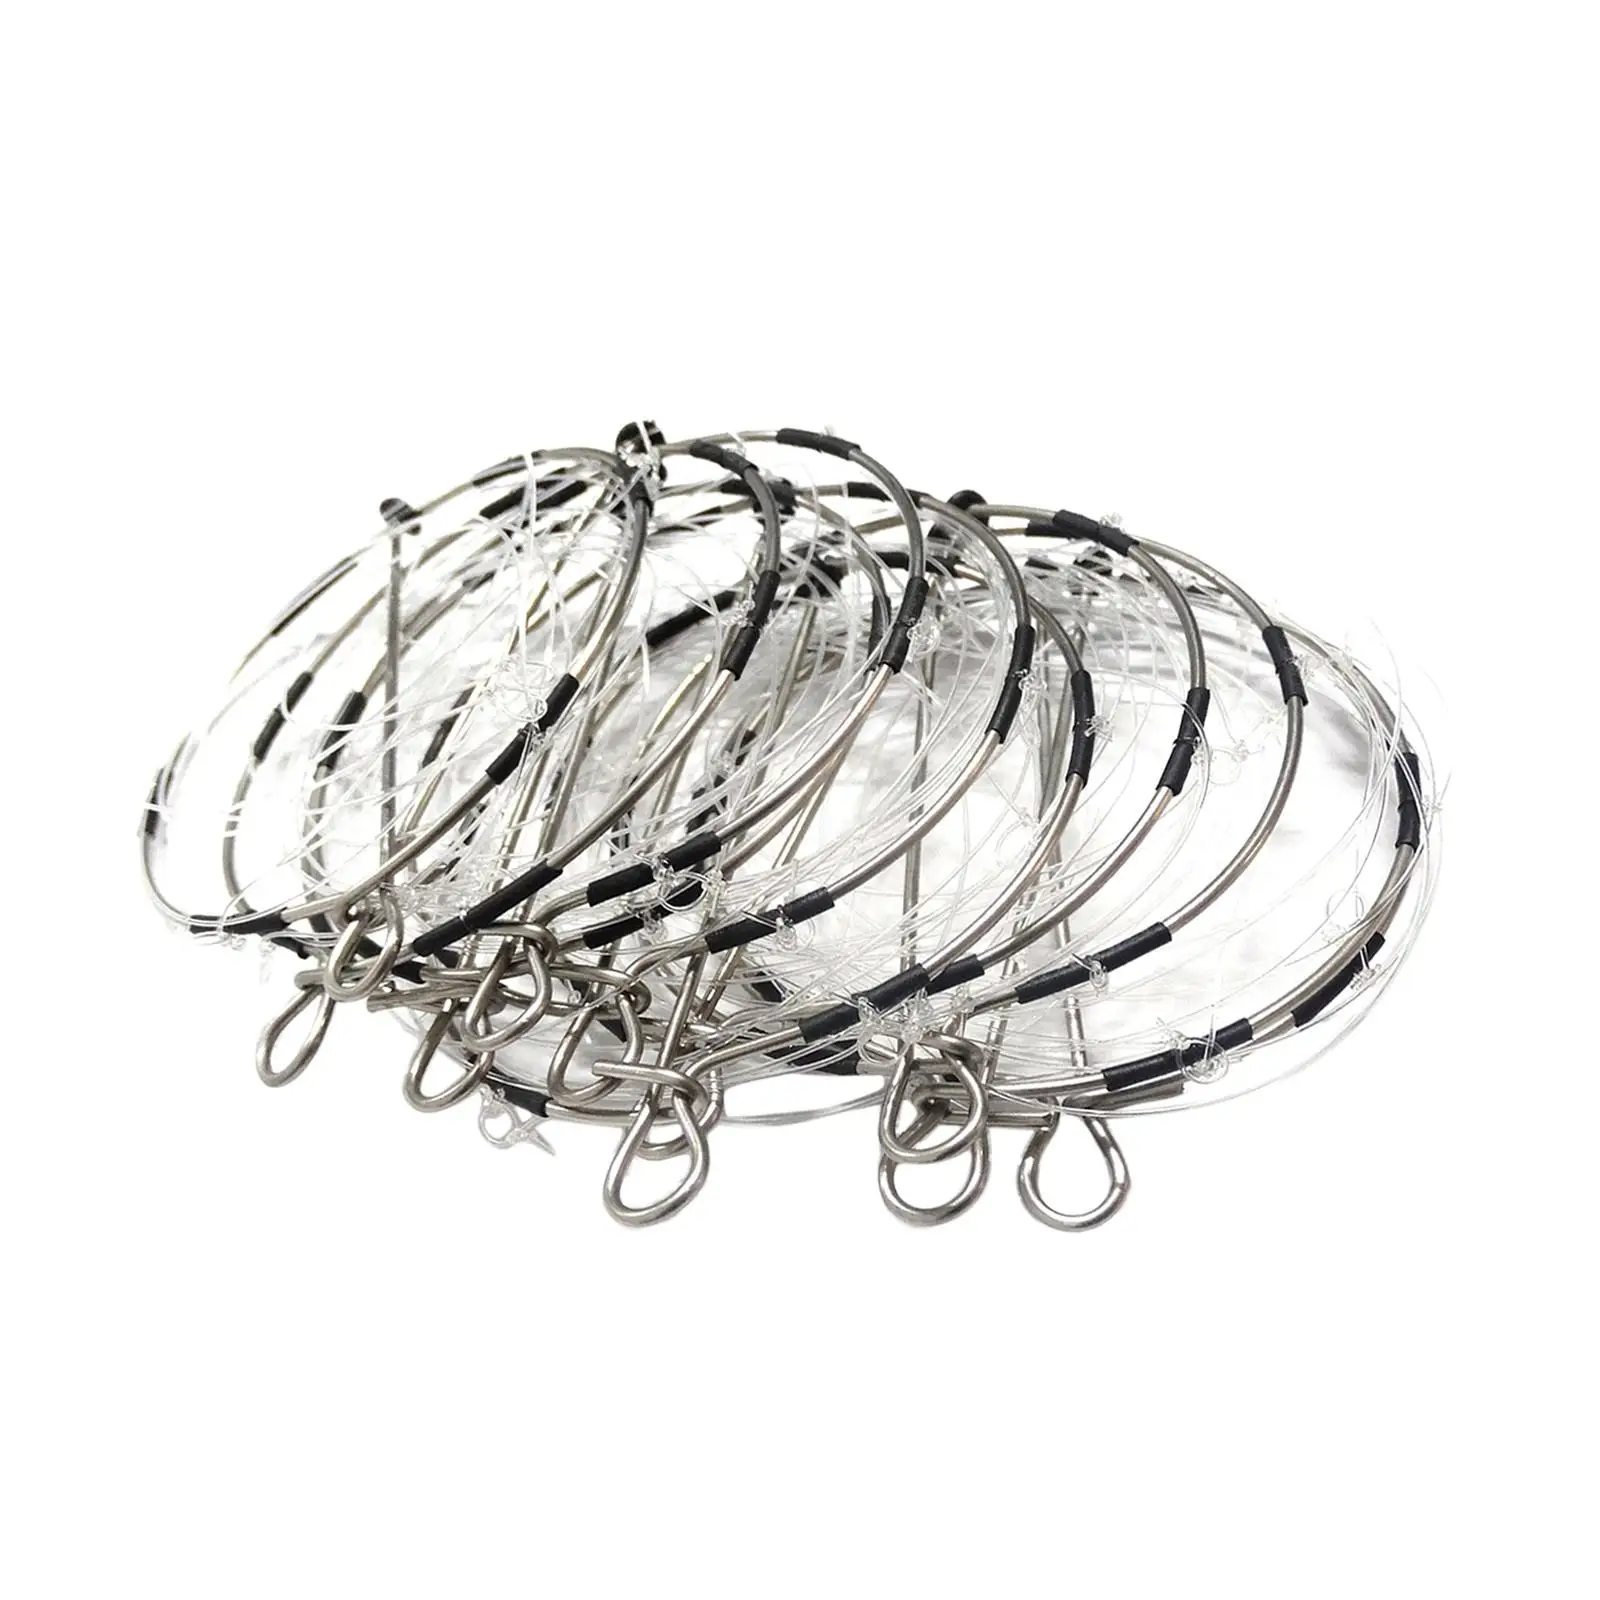 10x Crab Cast Trap Cast Dip Cage Collapsible Portable 6 Ring Repeated Use Steel for Lobster Crawdad Prawn Crab shrimp